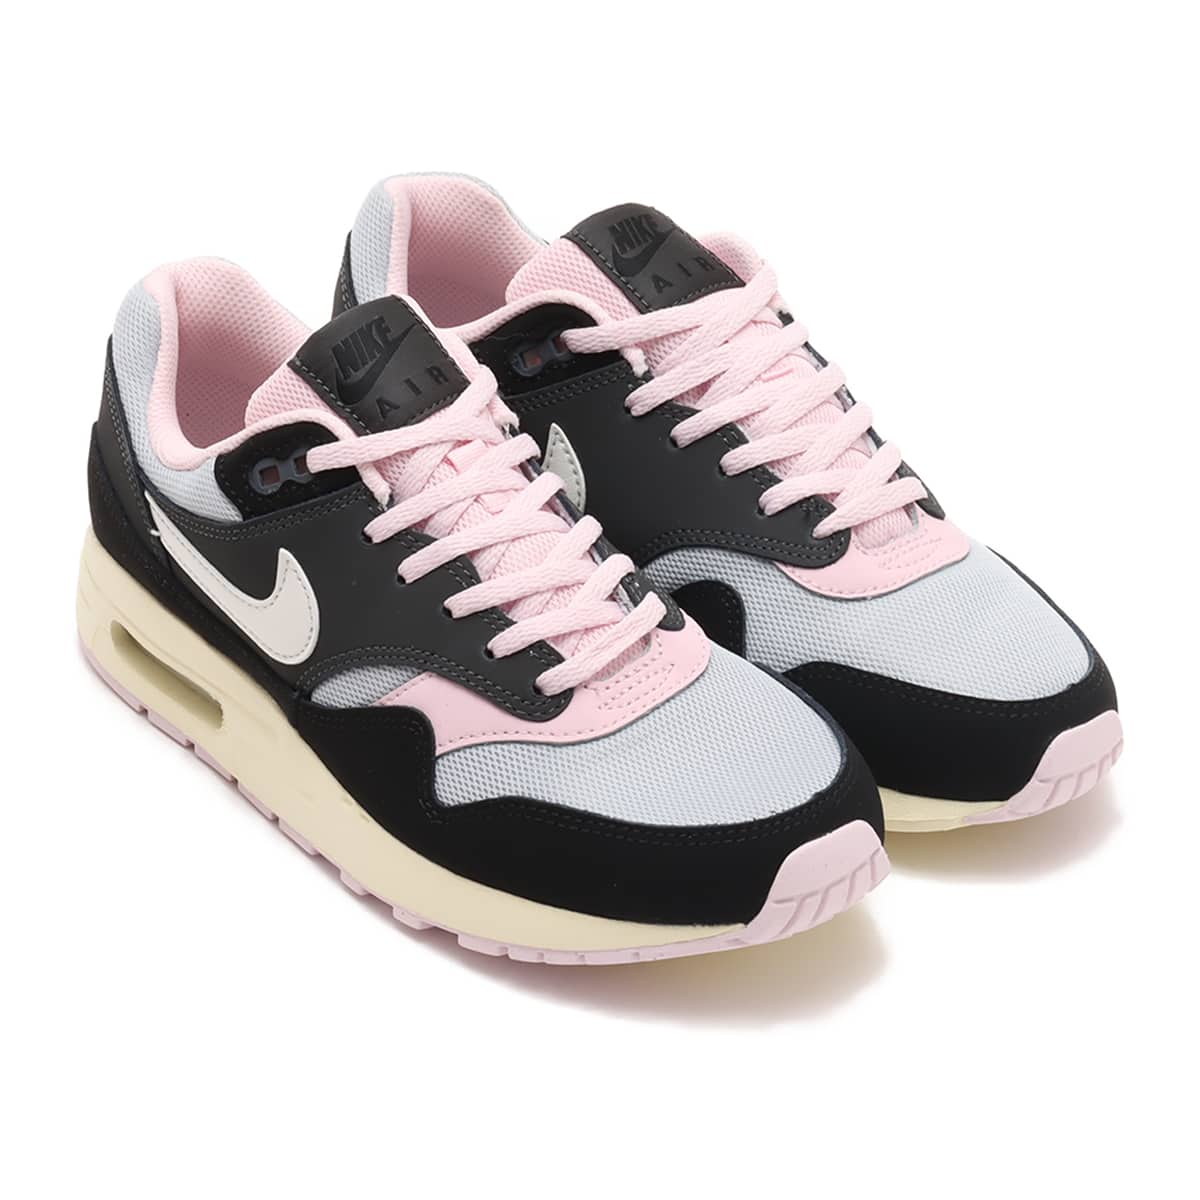 NIKE AIR MAX 1 (GS) BLACK/SUMMIT WHITE-ANTHRACITE-PINK FOAM 23HO-I_photo_large